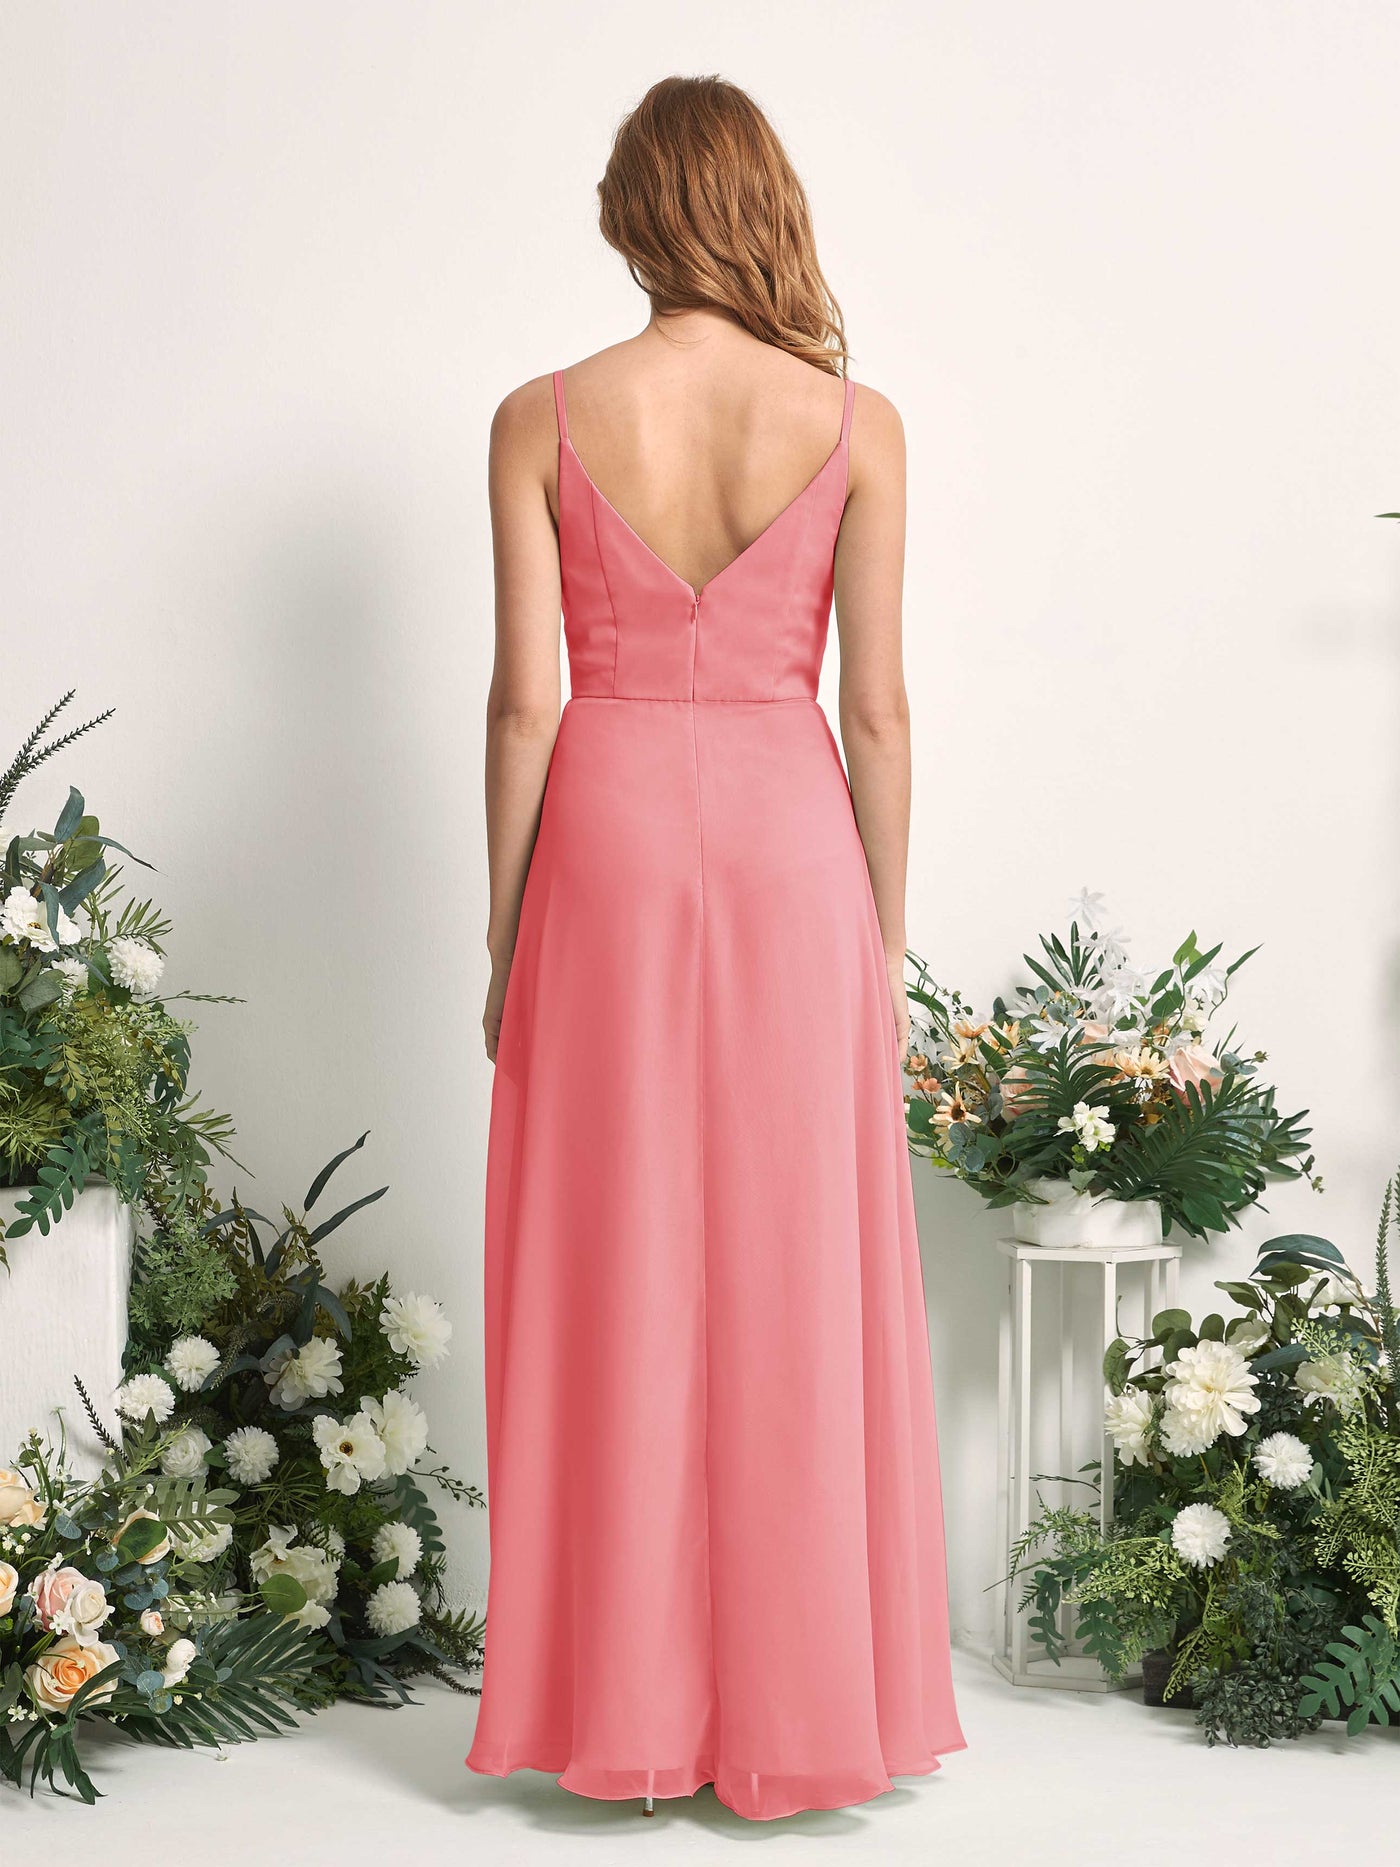 Bridesmaid Dress A-line Chiffon Spaghetti-straps Full Length Sleeveless Wedding Party Dress - Coral Pink (81227230)#color_coral-pink